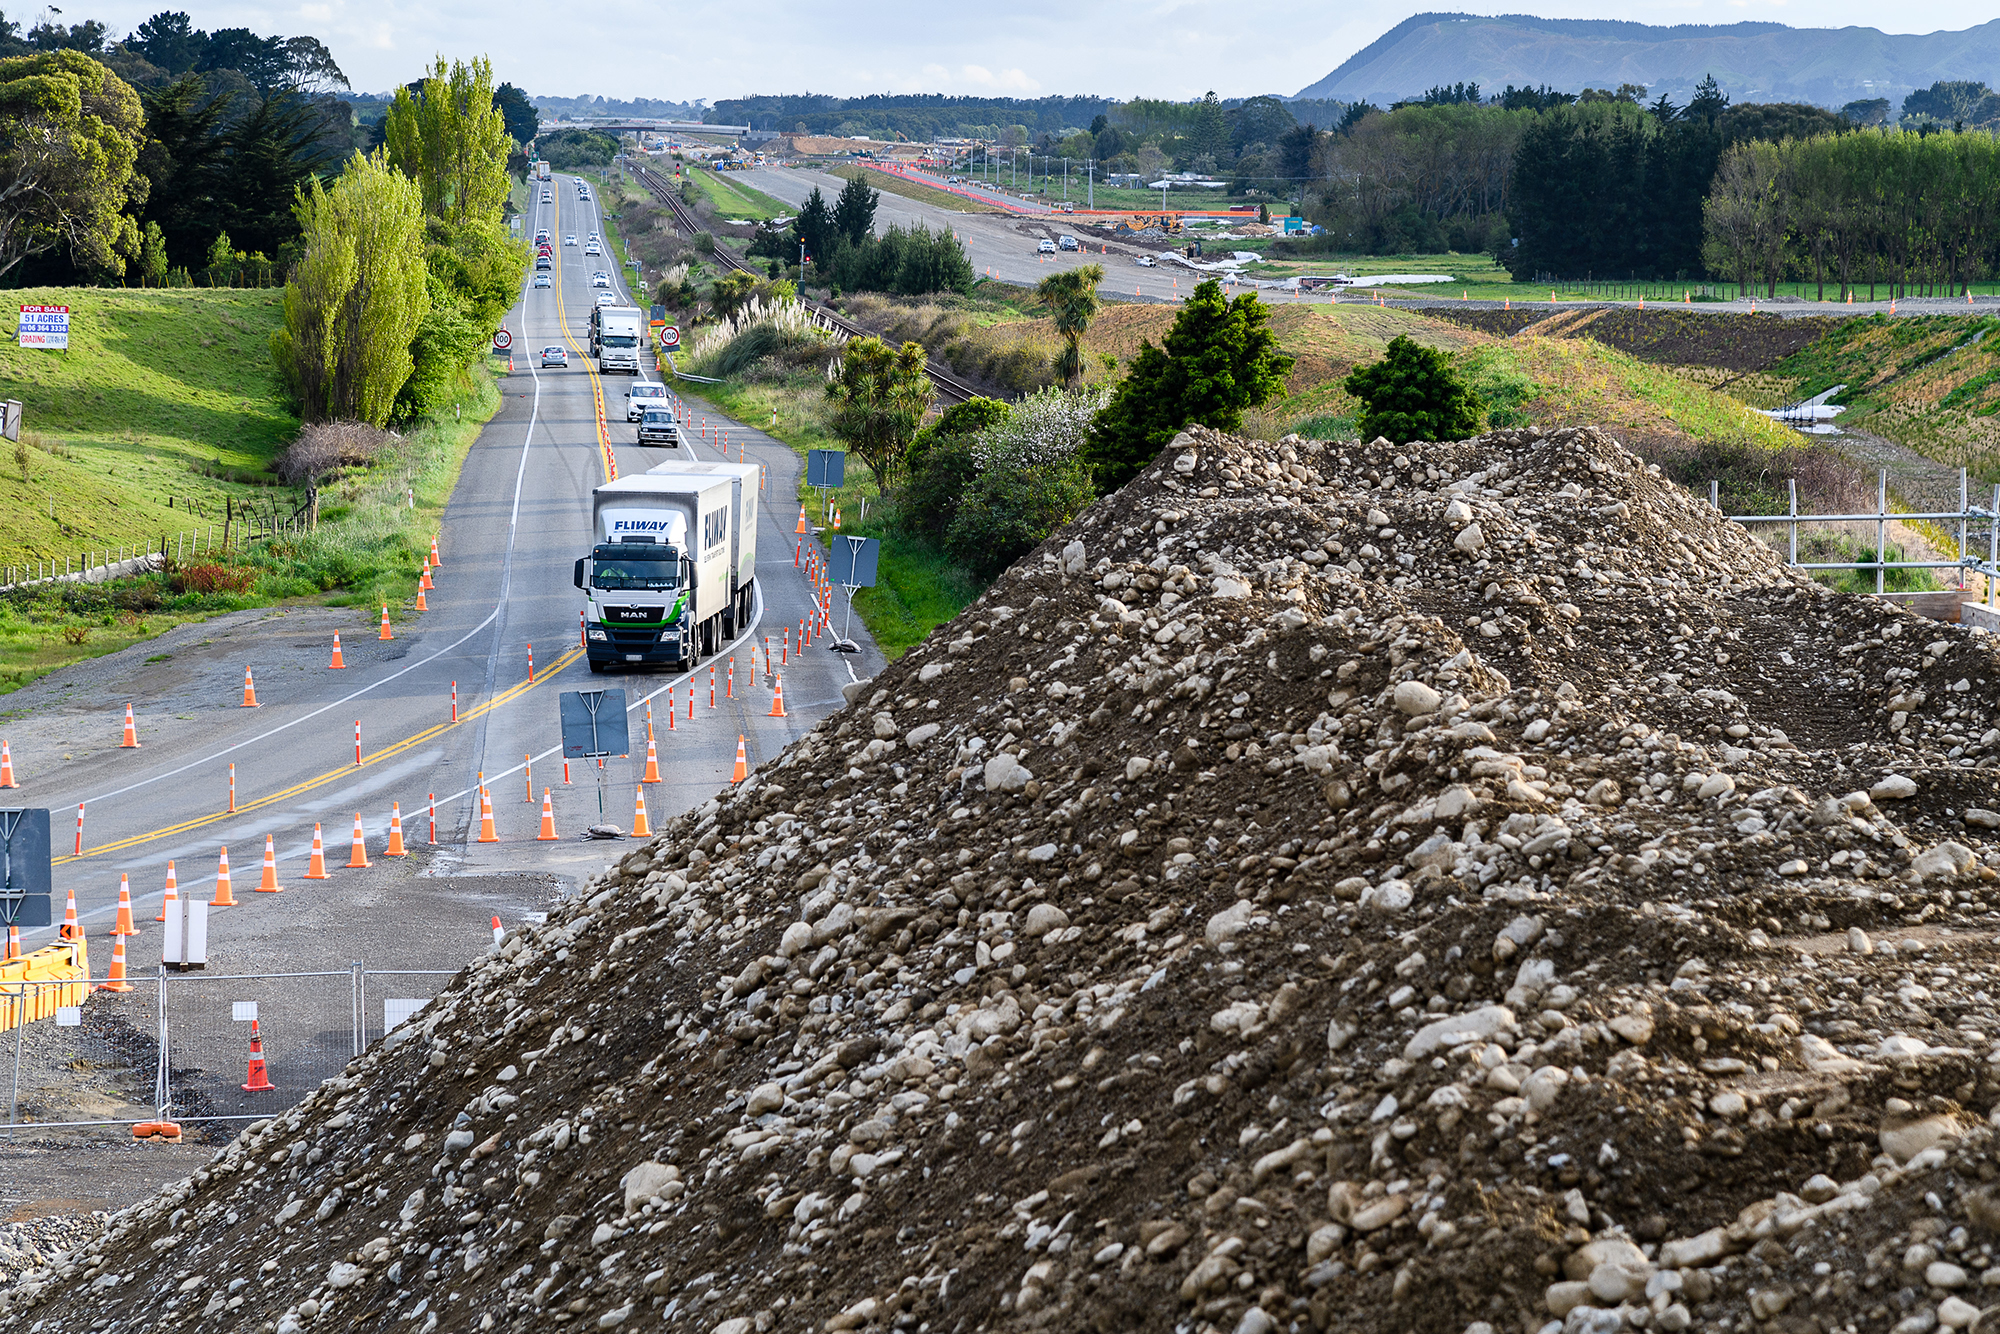 Large pile of dirt in the foreground with traffic separated by road cones.